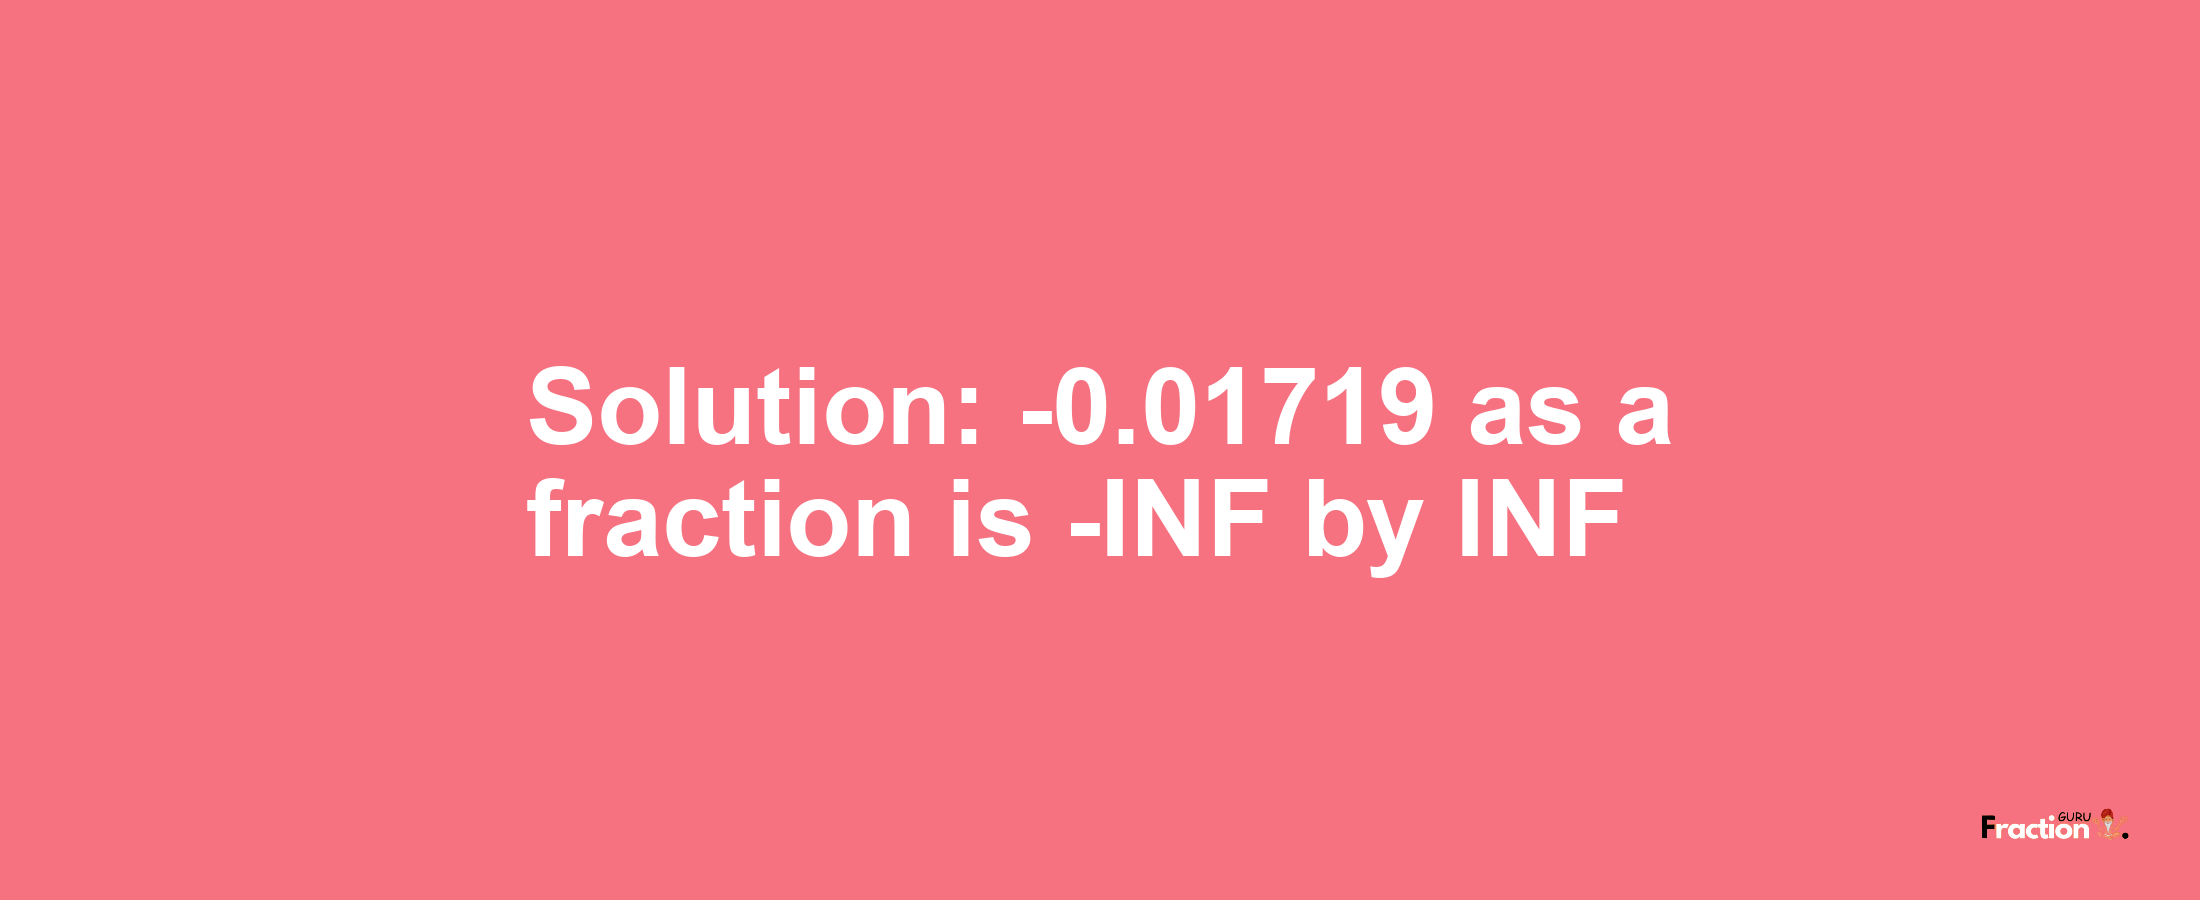 Solution:-0.01719 as a fraction is -INF/INF